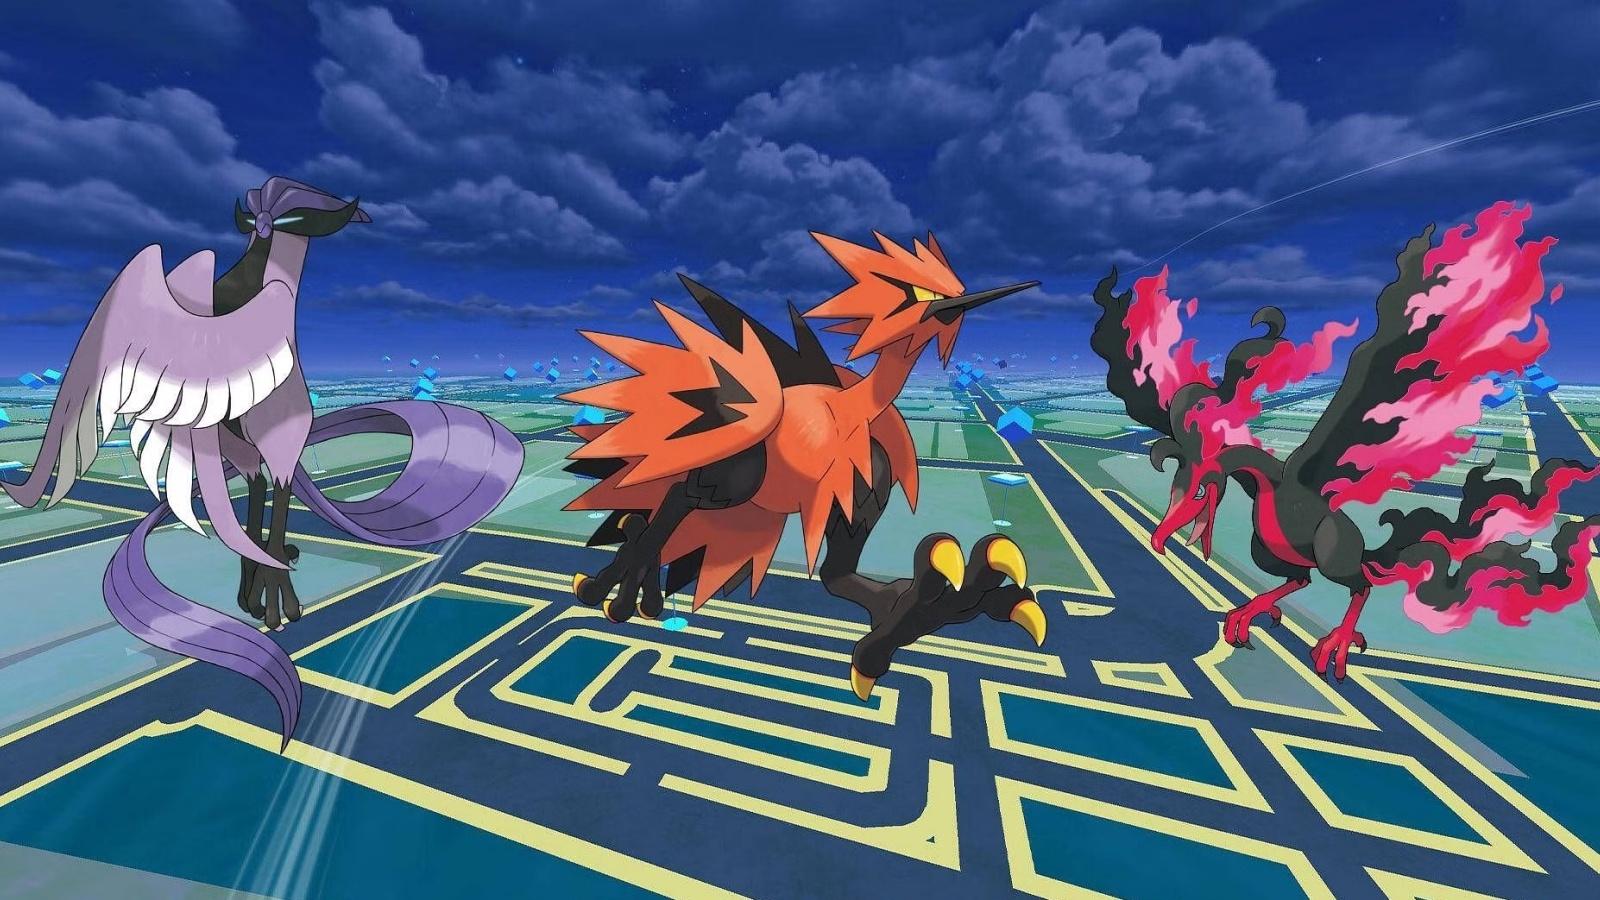 Pokemon Go players are capturing their monsters in a lot of